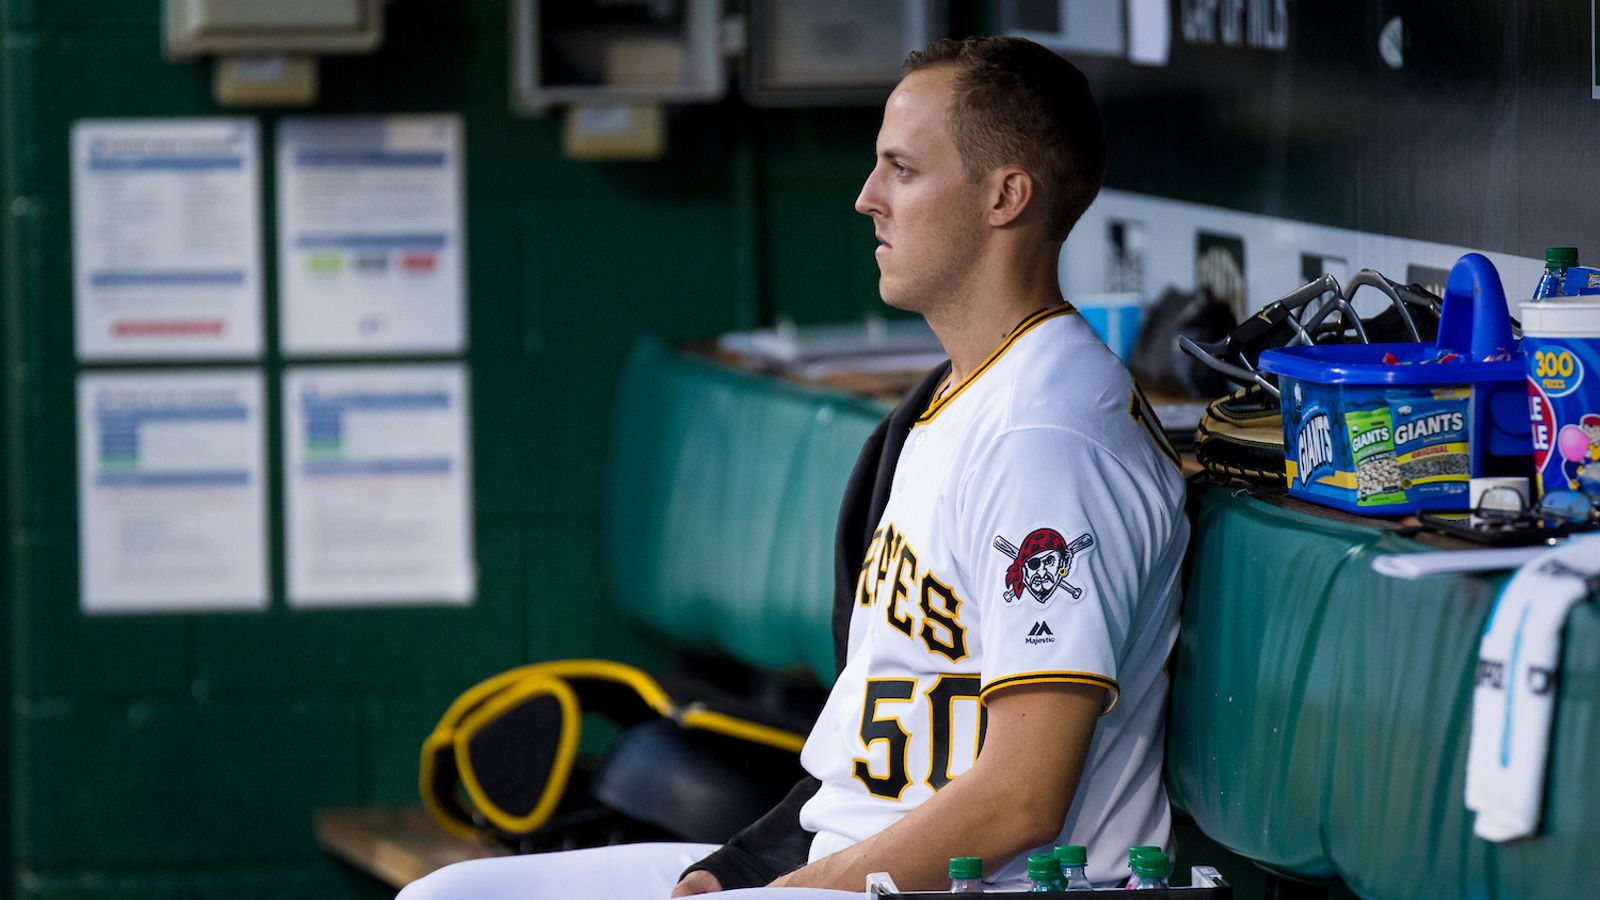 Taillon out until 2021 after unexpected second Tommy John